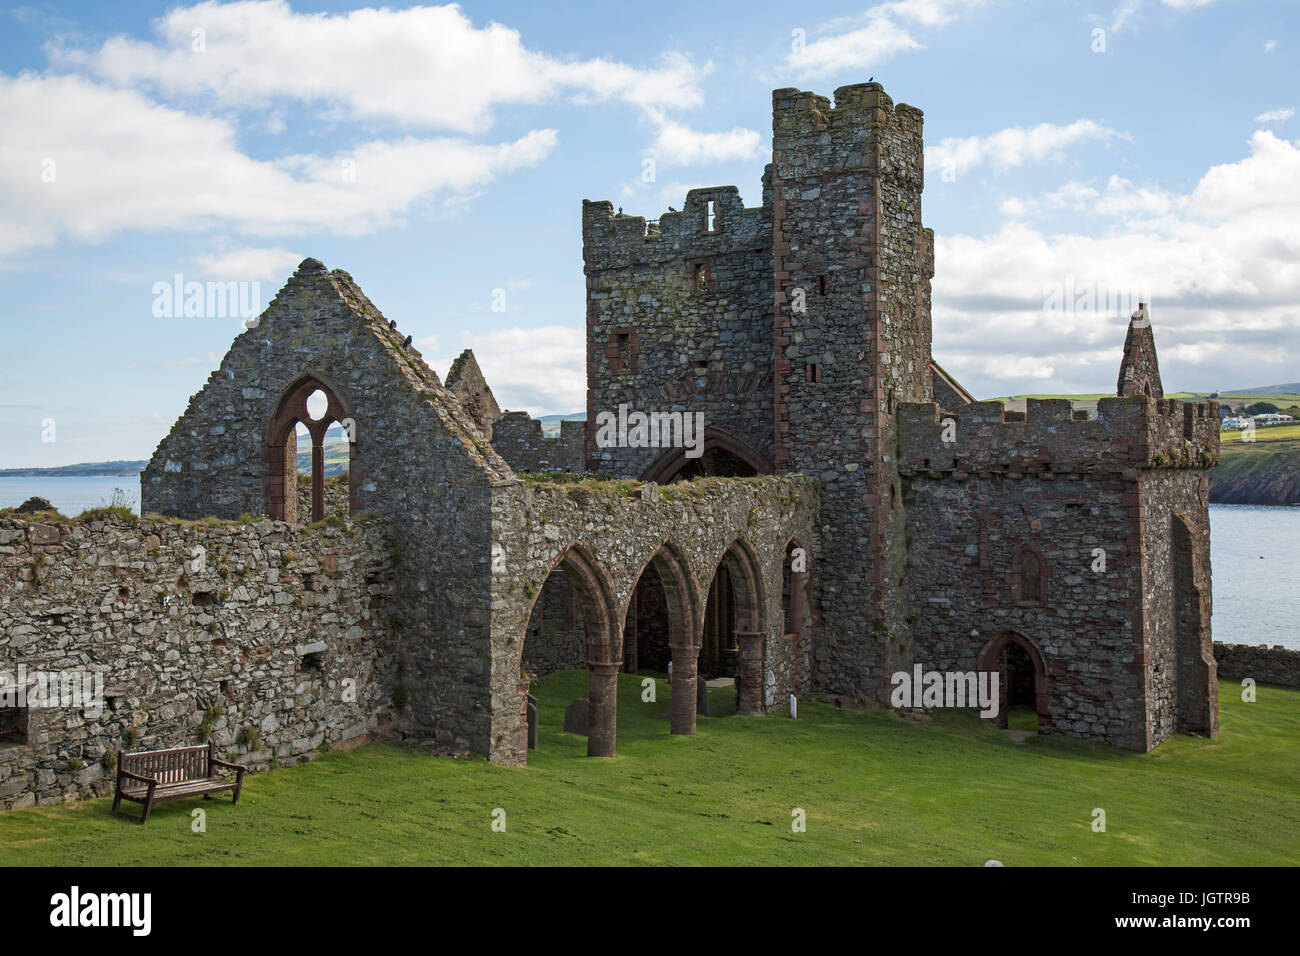 View of buildings at Peel Castle on The Isle of man. Stock Photo